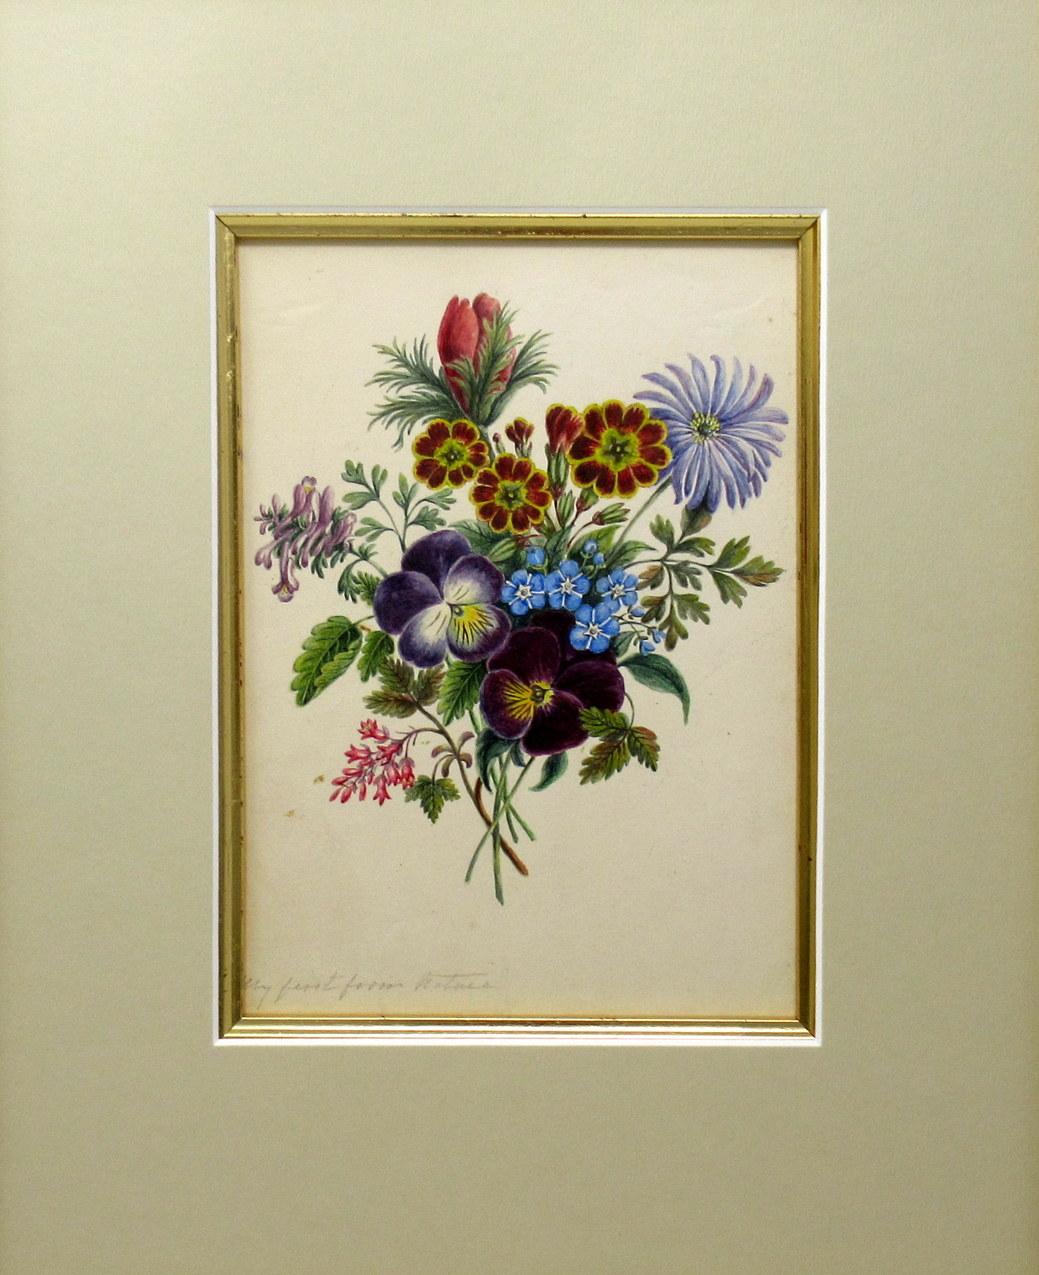 An exceptionally fine quality framed watercolor painting on paper of English origin, circa 1900.

Professionally re-mounted on artists card within a gold leaf wooden slip. This picture is offered glazed.

This delightful painting depicts sprays